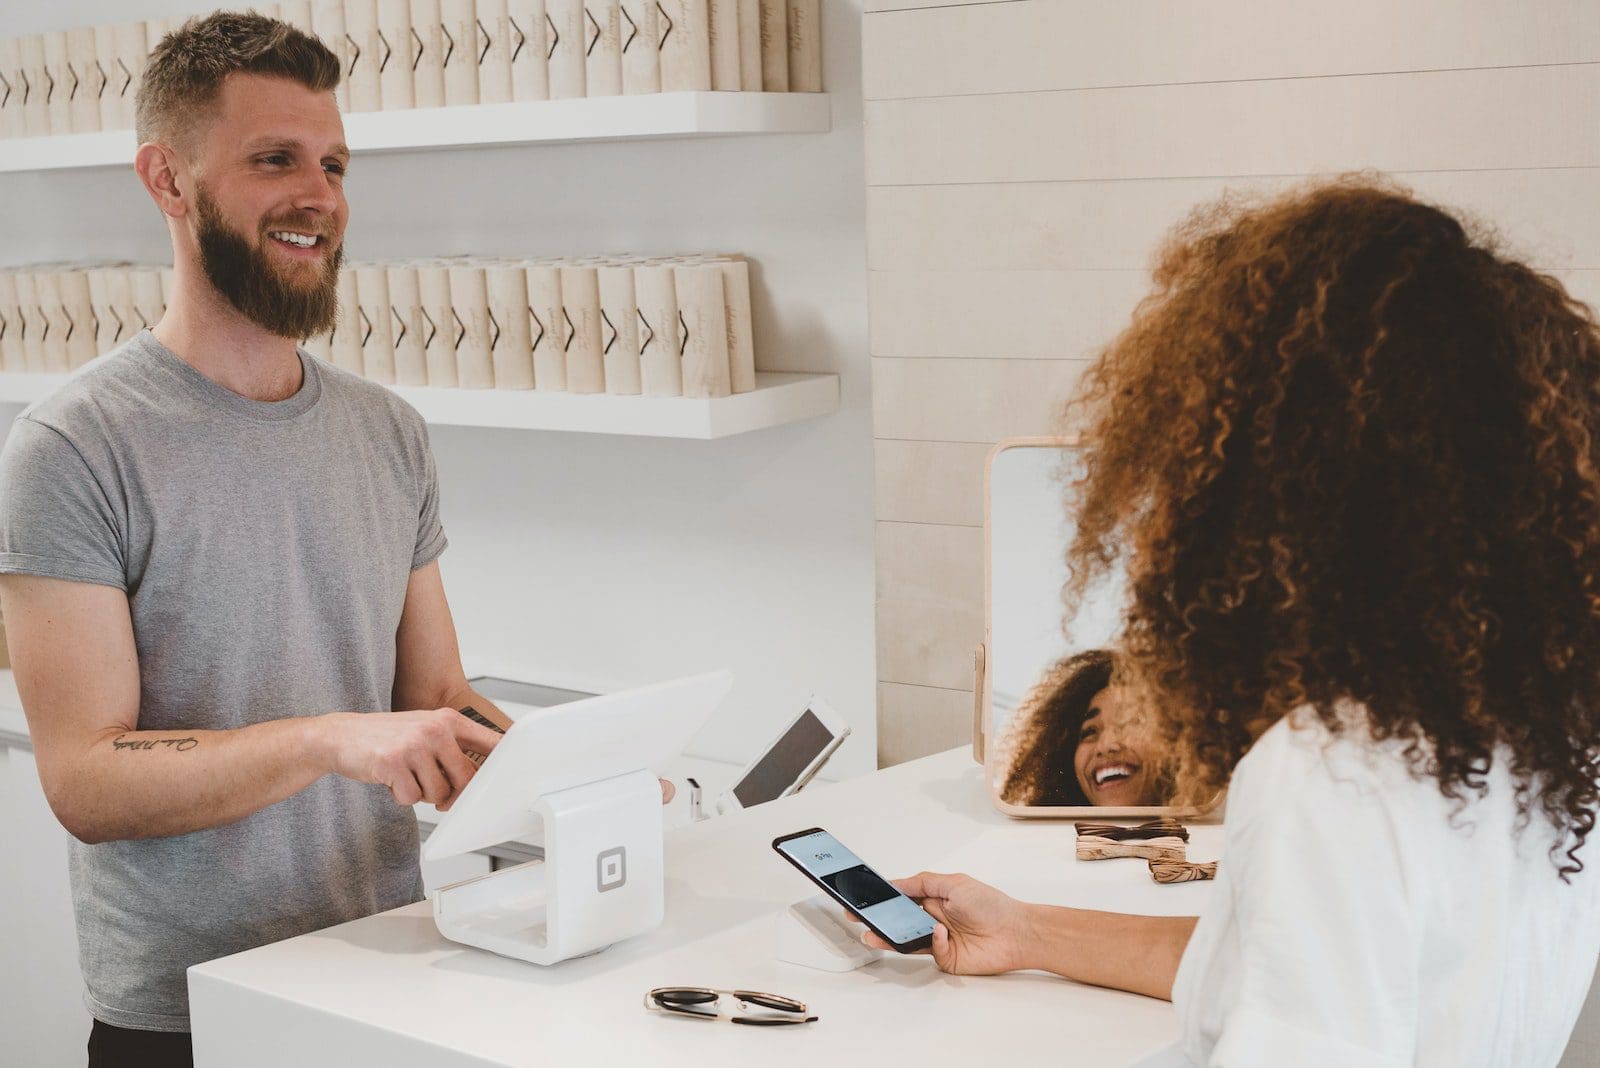 man in grey crew-neck t-shirt smiling to woman on counter customers and product management